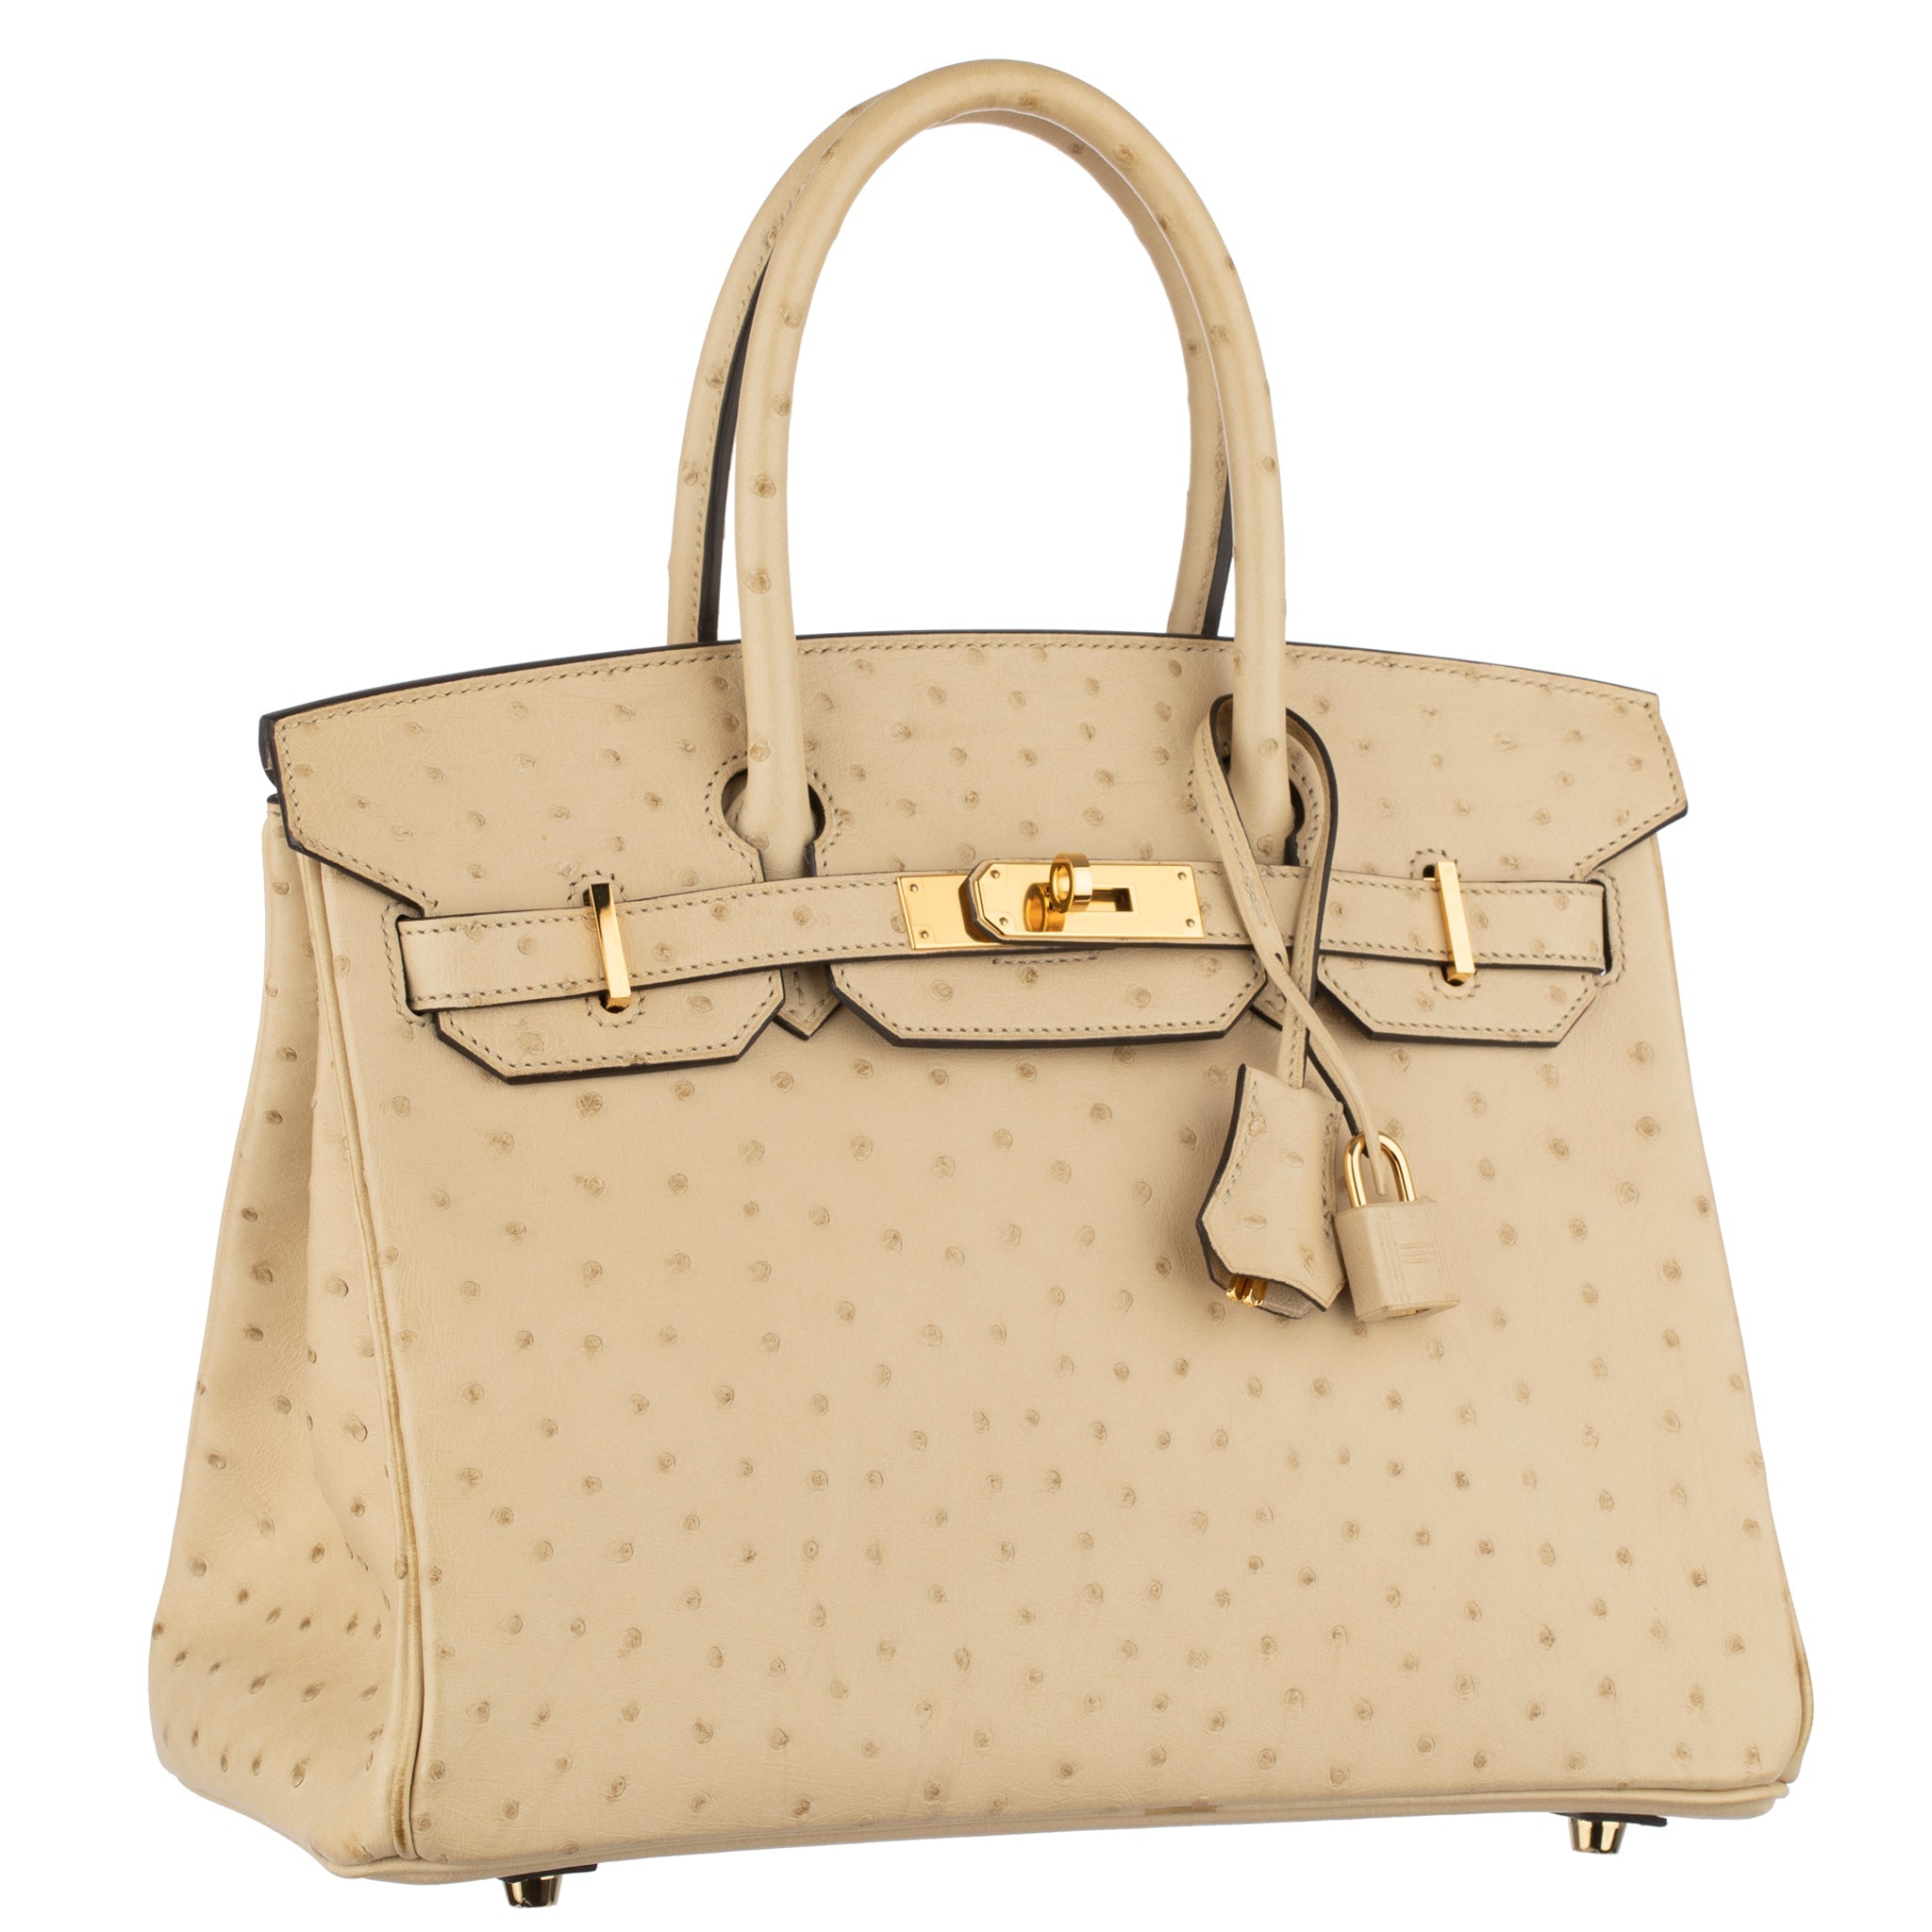 HERMES 30CM BIRKIN PARCHEMIN OSTRICH LEATHER GOLD HARDWARE - On Repeat